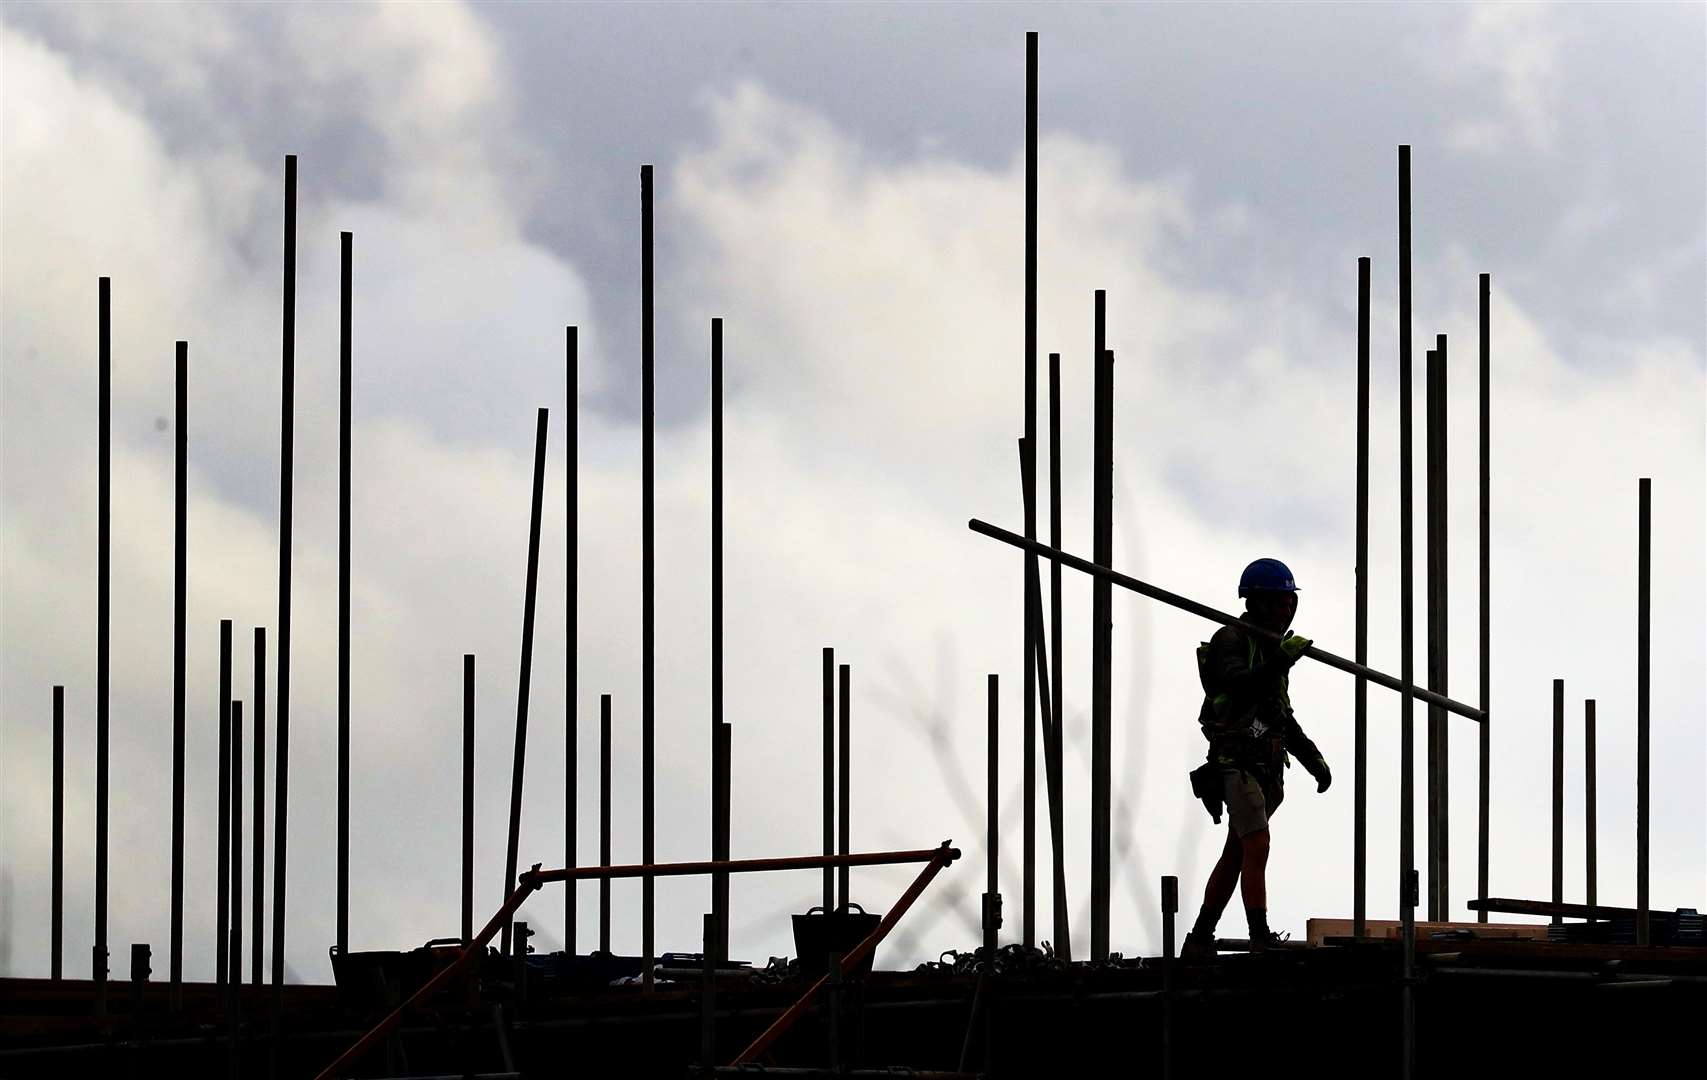 Housebuilding targets and environmental pledges are both at risk of going unmet, the committee said (Gareth Fuller/PA)